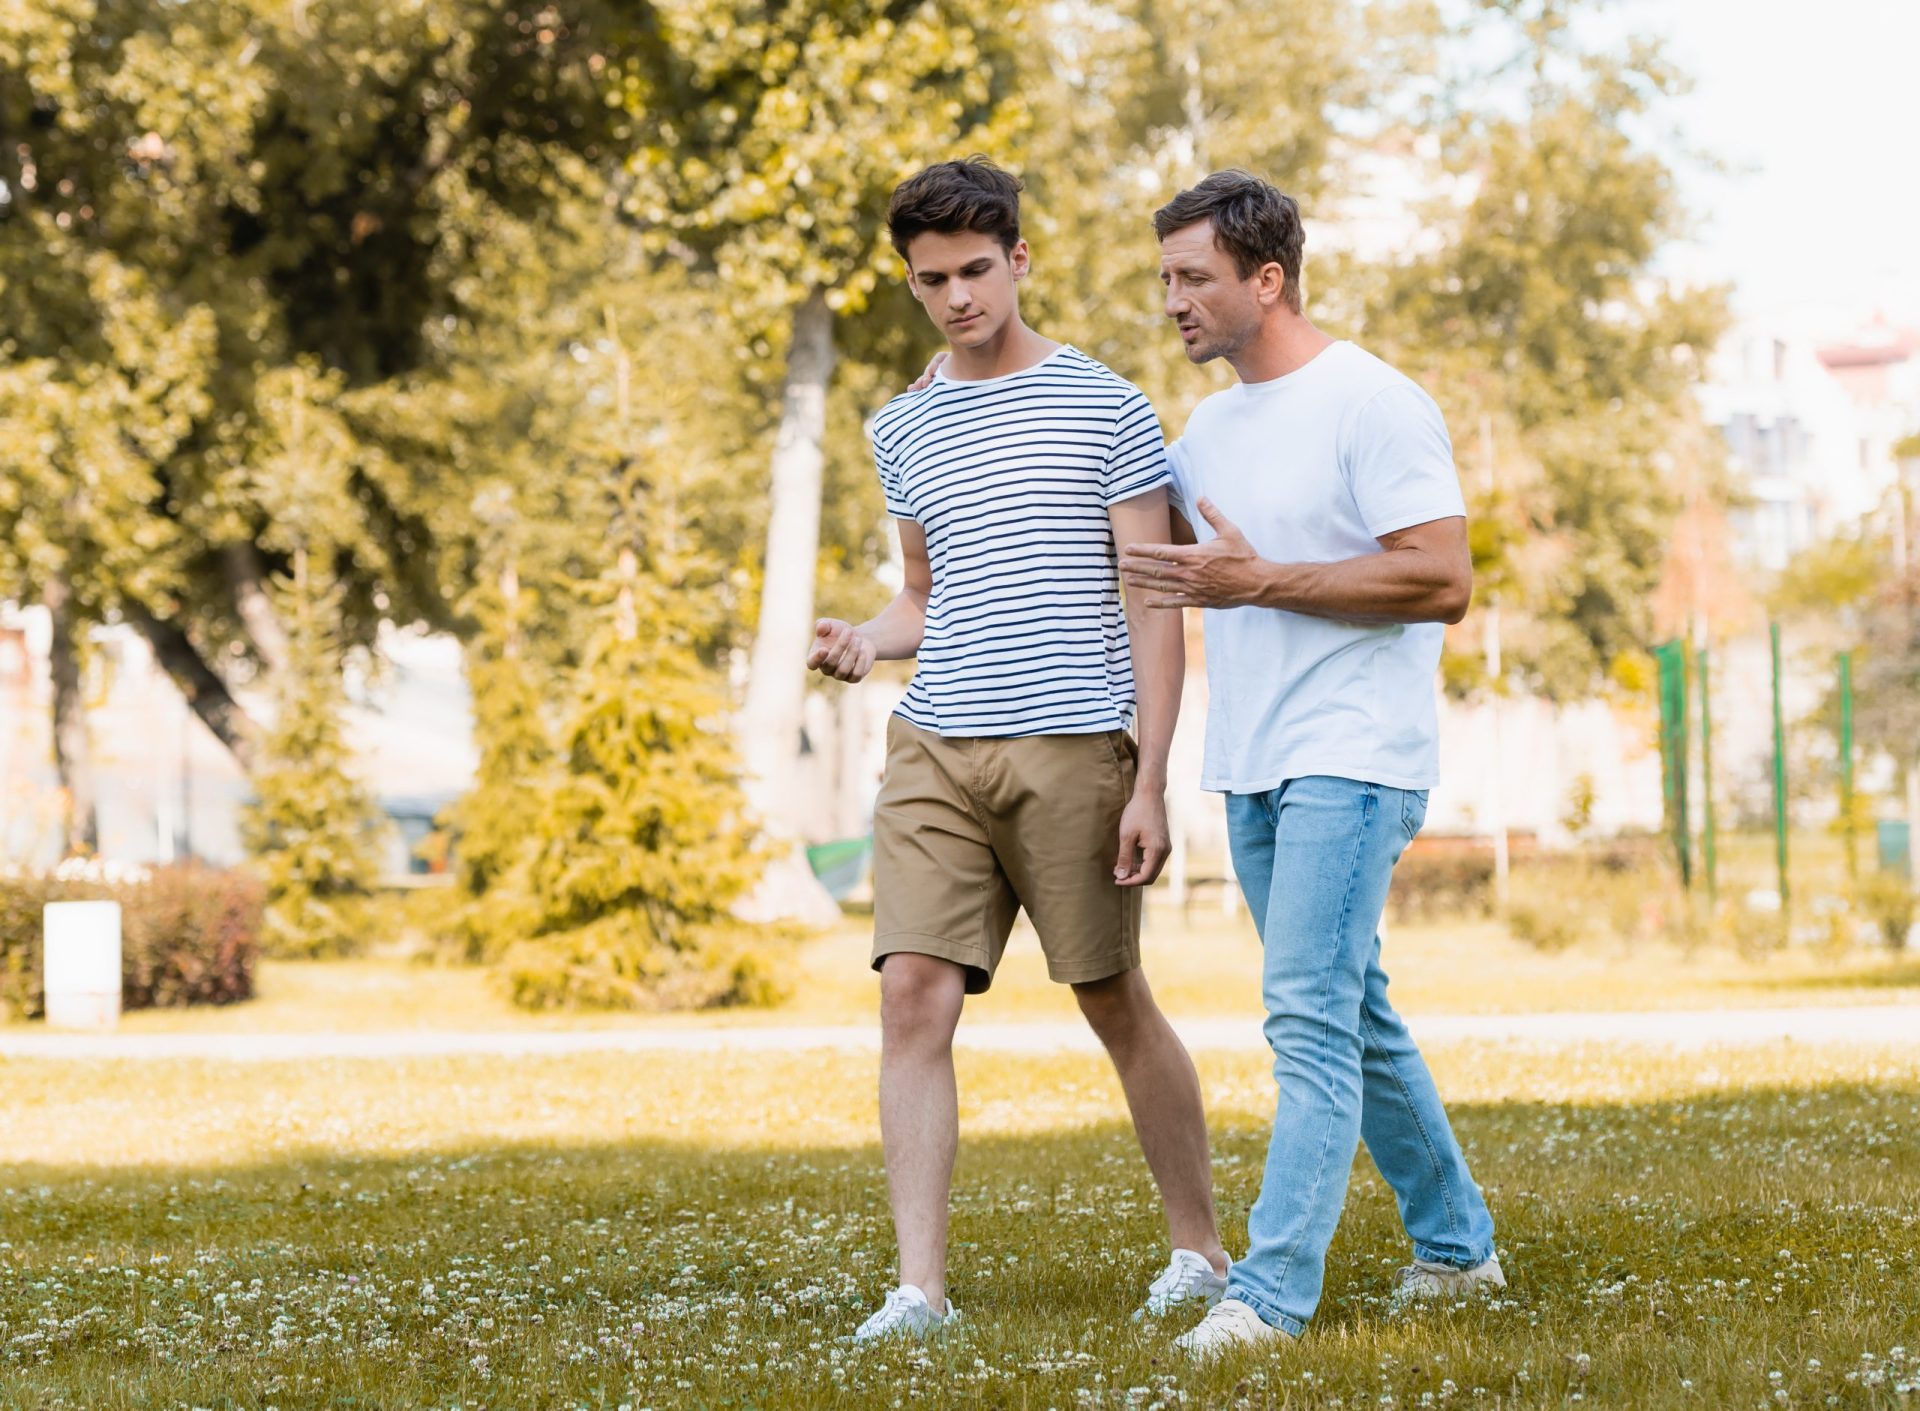 man gesturing while walking and talking with teenager son in park